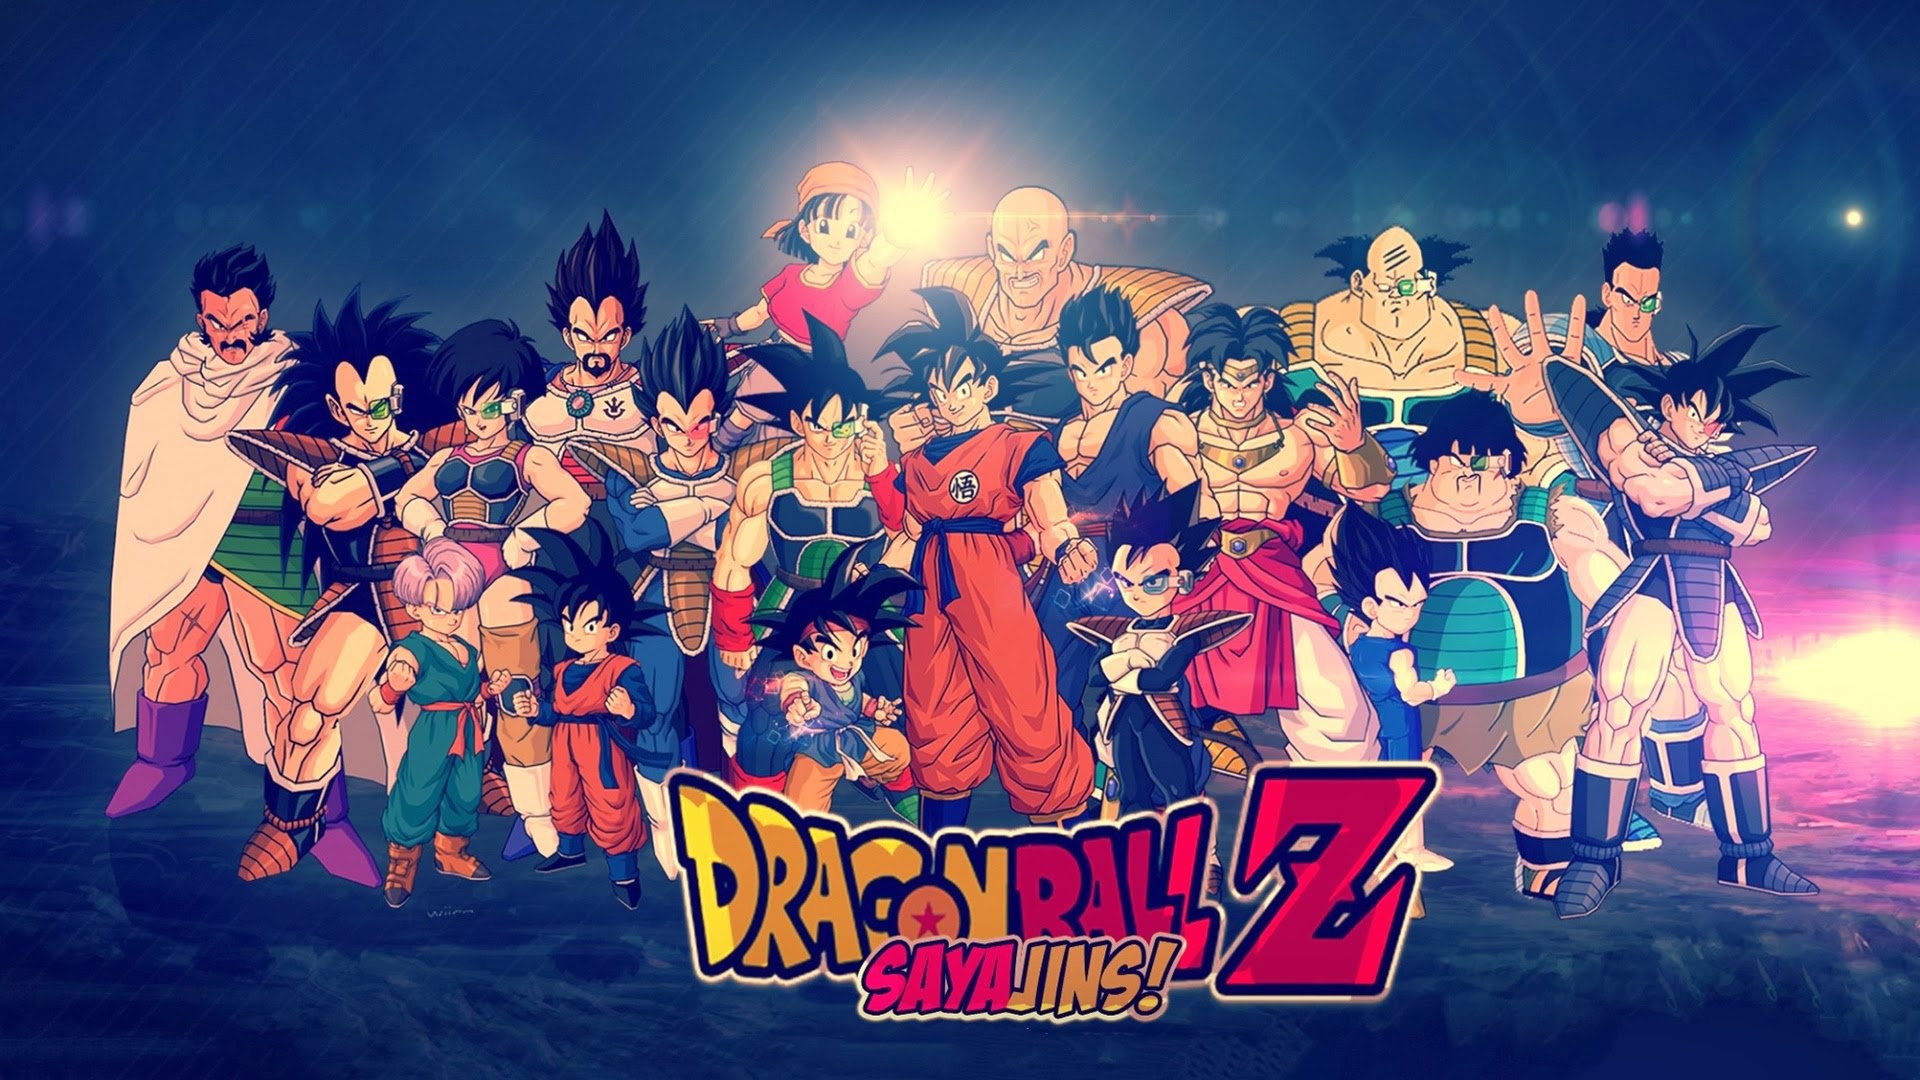 2 Dragon Ball Gt Live Wallpapers, Animated Wallpapers - MoeWalls